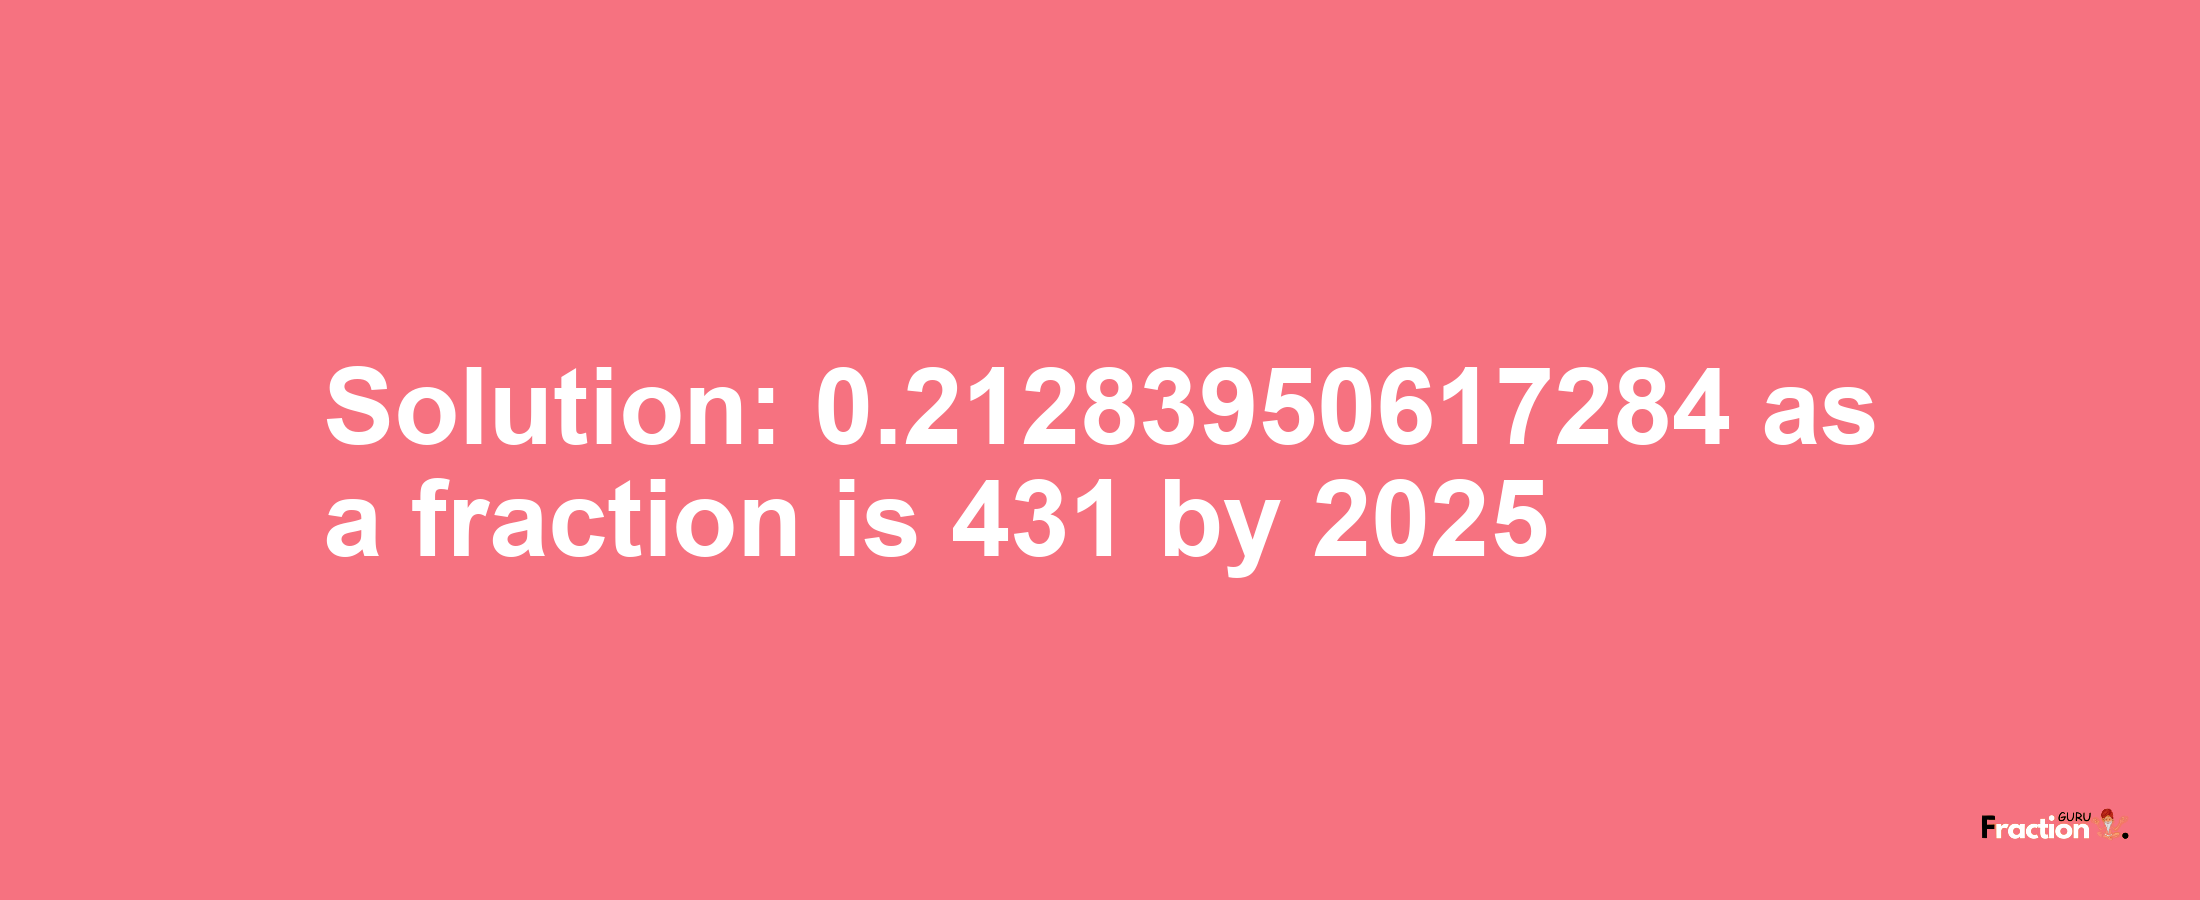 Solution:0.21283950617284 as a fraction is 431/2025